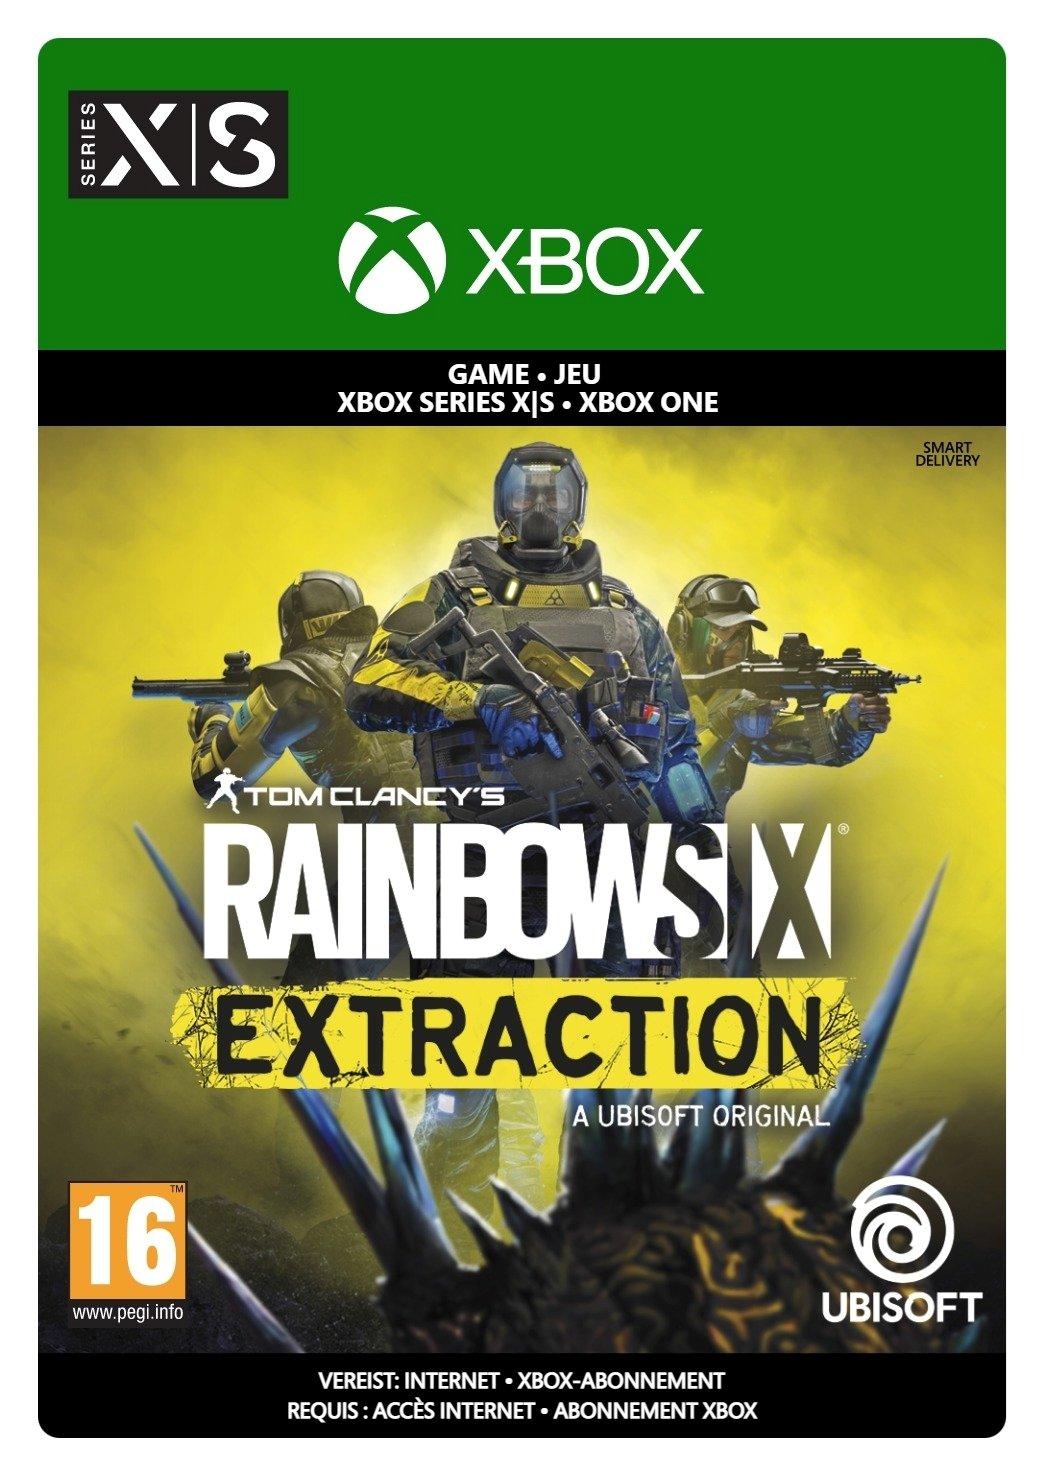 Tom Clancy's Rainbow Six Extraction Standard Edition - Xbox Series X/Xbox One - Game | G3Q-01191 (a854eafe-4f9e-a346-a716-8321ac6b9422)